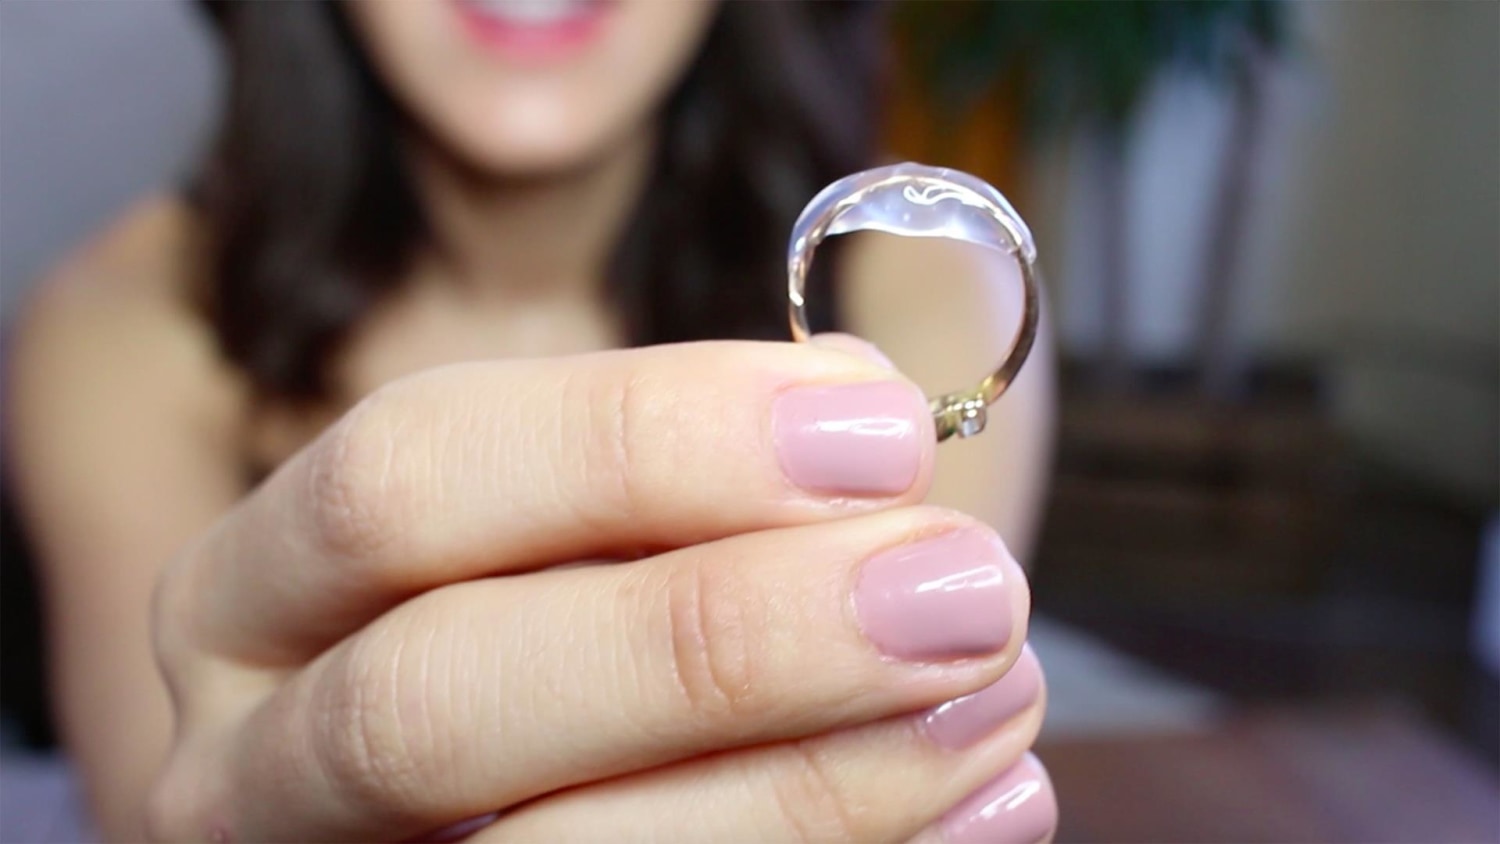 How to resize your ring in less than 1 minute